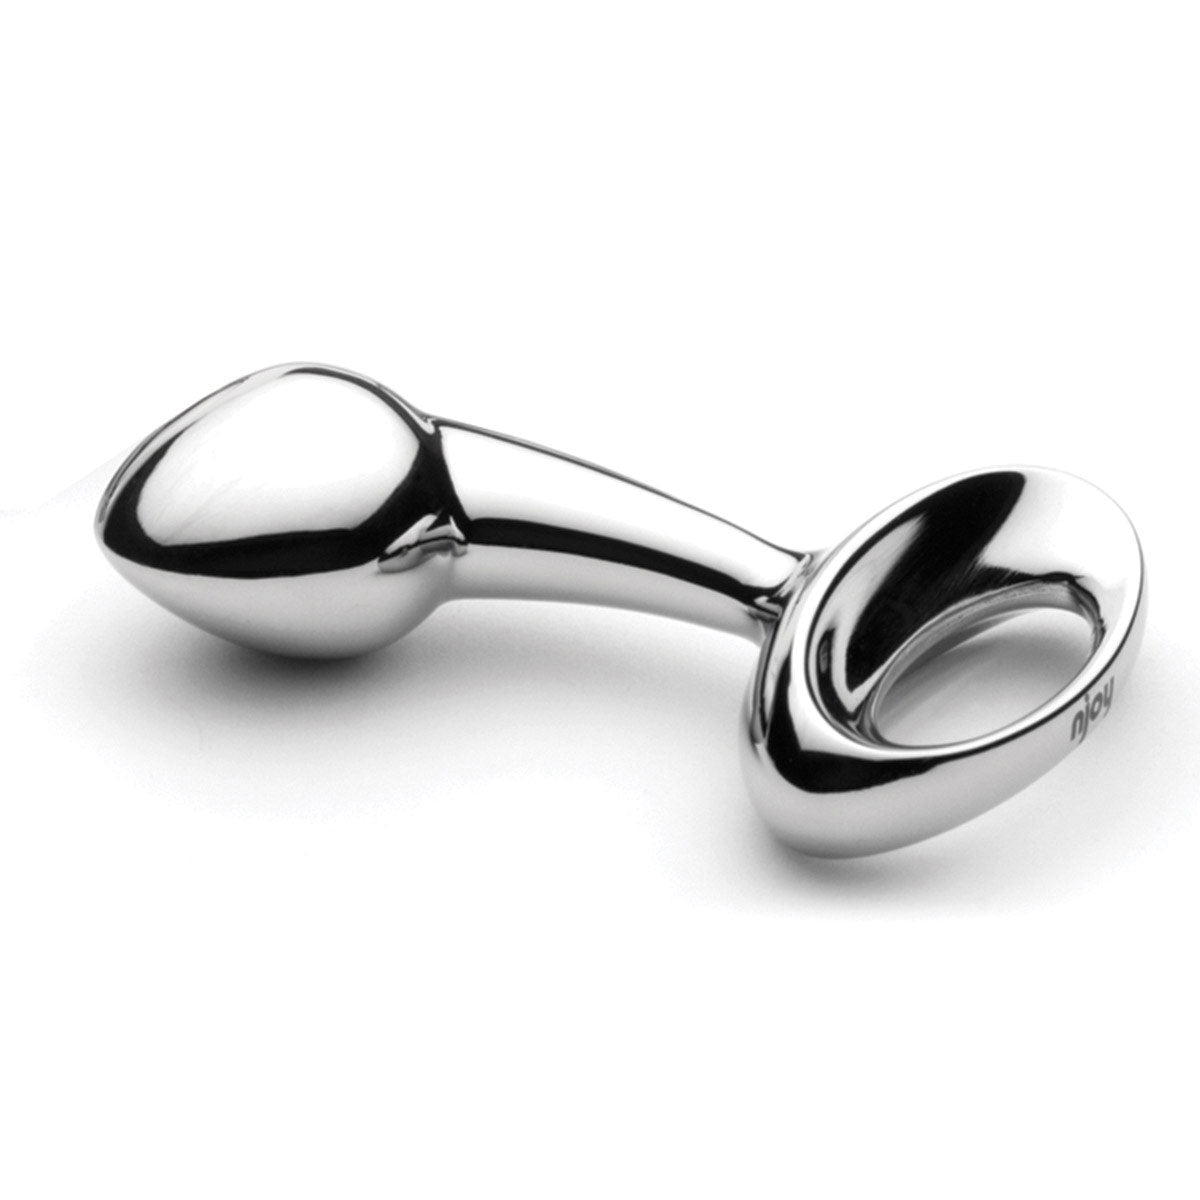 njoy Pure Stainless Steel Butt Plug - Small